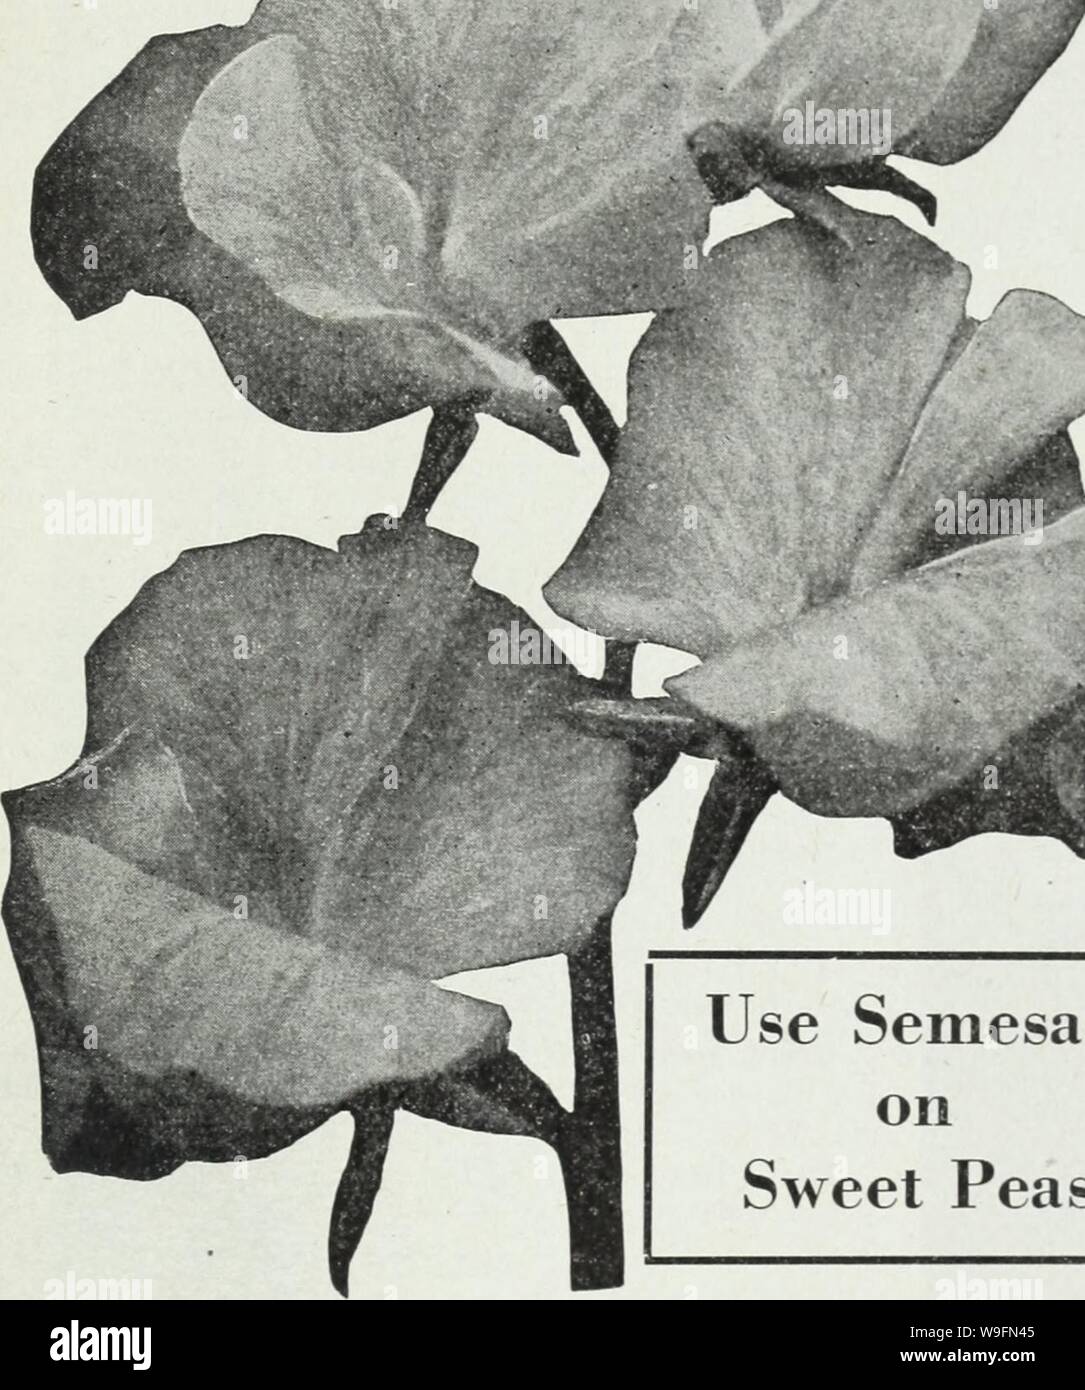 Archive image from page 56 of Currie's farm and garden annual. Currie's farm and garden annual : spring 1930  curriesfarmgarde19curr Year: 1930 ( / &gt; &gt; m Use Semesan on Sweet Peas SWEET PEAS Beautiful, Fragrant, Fashionable HOW TO GROW THEM Sweet Peas should be planted as early in spring as the ground can be worked. Rich loam with an abundance of well rotted manure is an ideal soil. A trench about 6 inches deep should be made, sowing the seed thinly in the bottom, and cover with an inch of soil, pressing it down firmly. Gradually fill in the trench as the plants grow, and thin out to 2 t Stock Photo